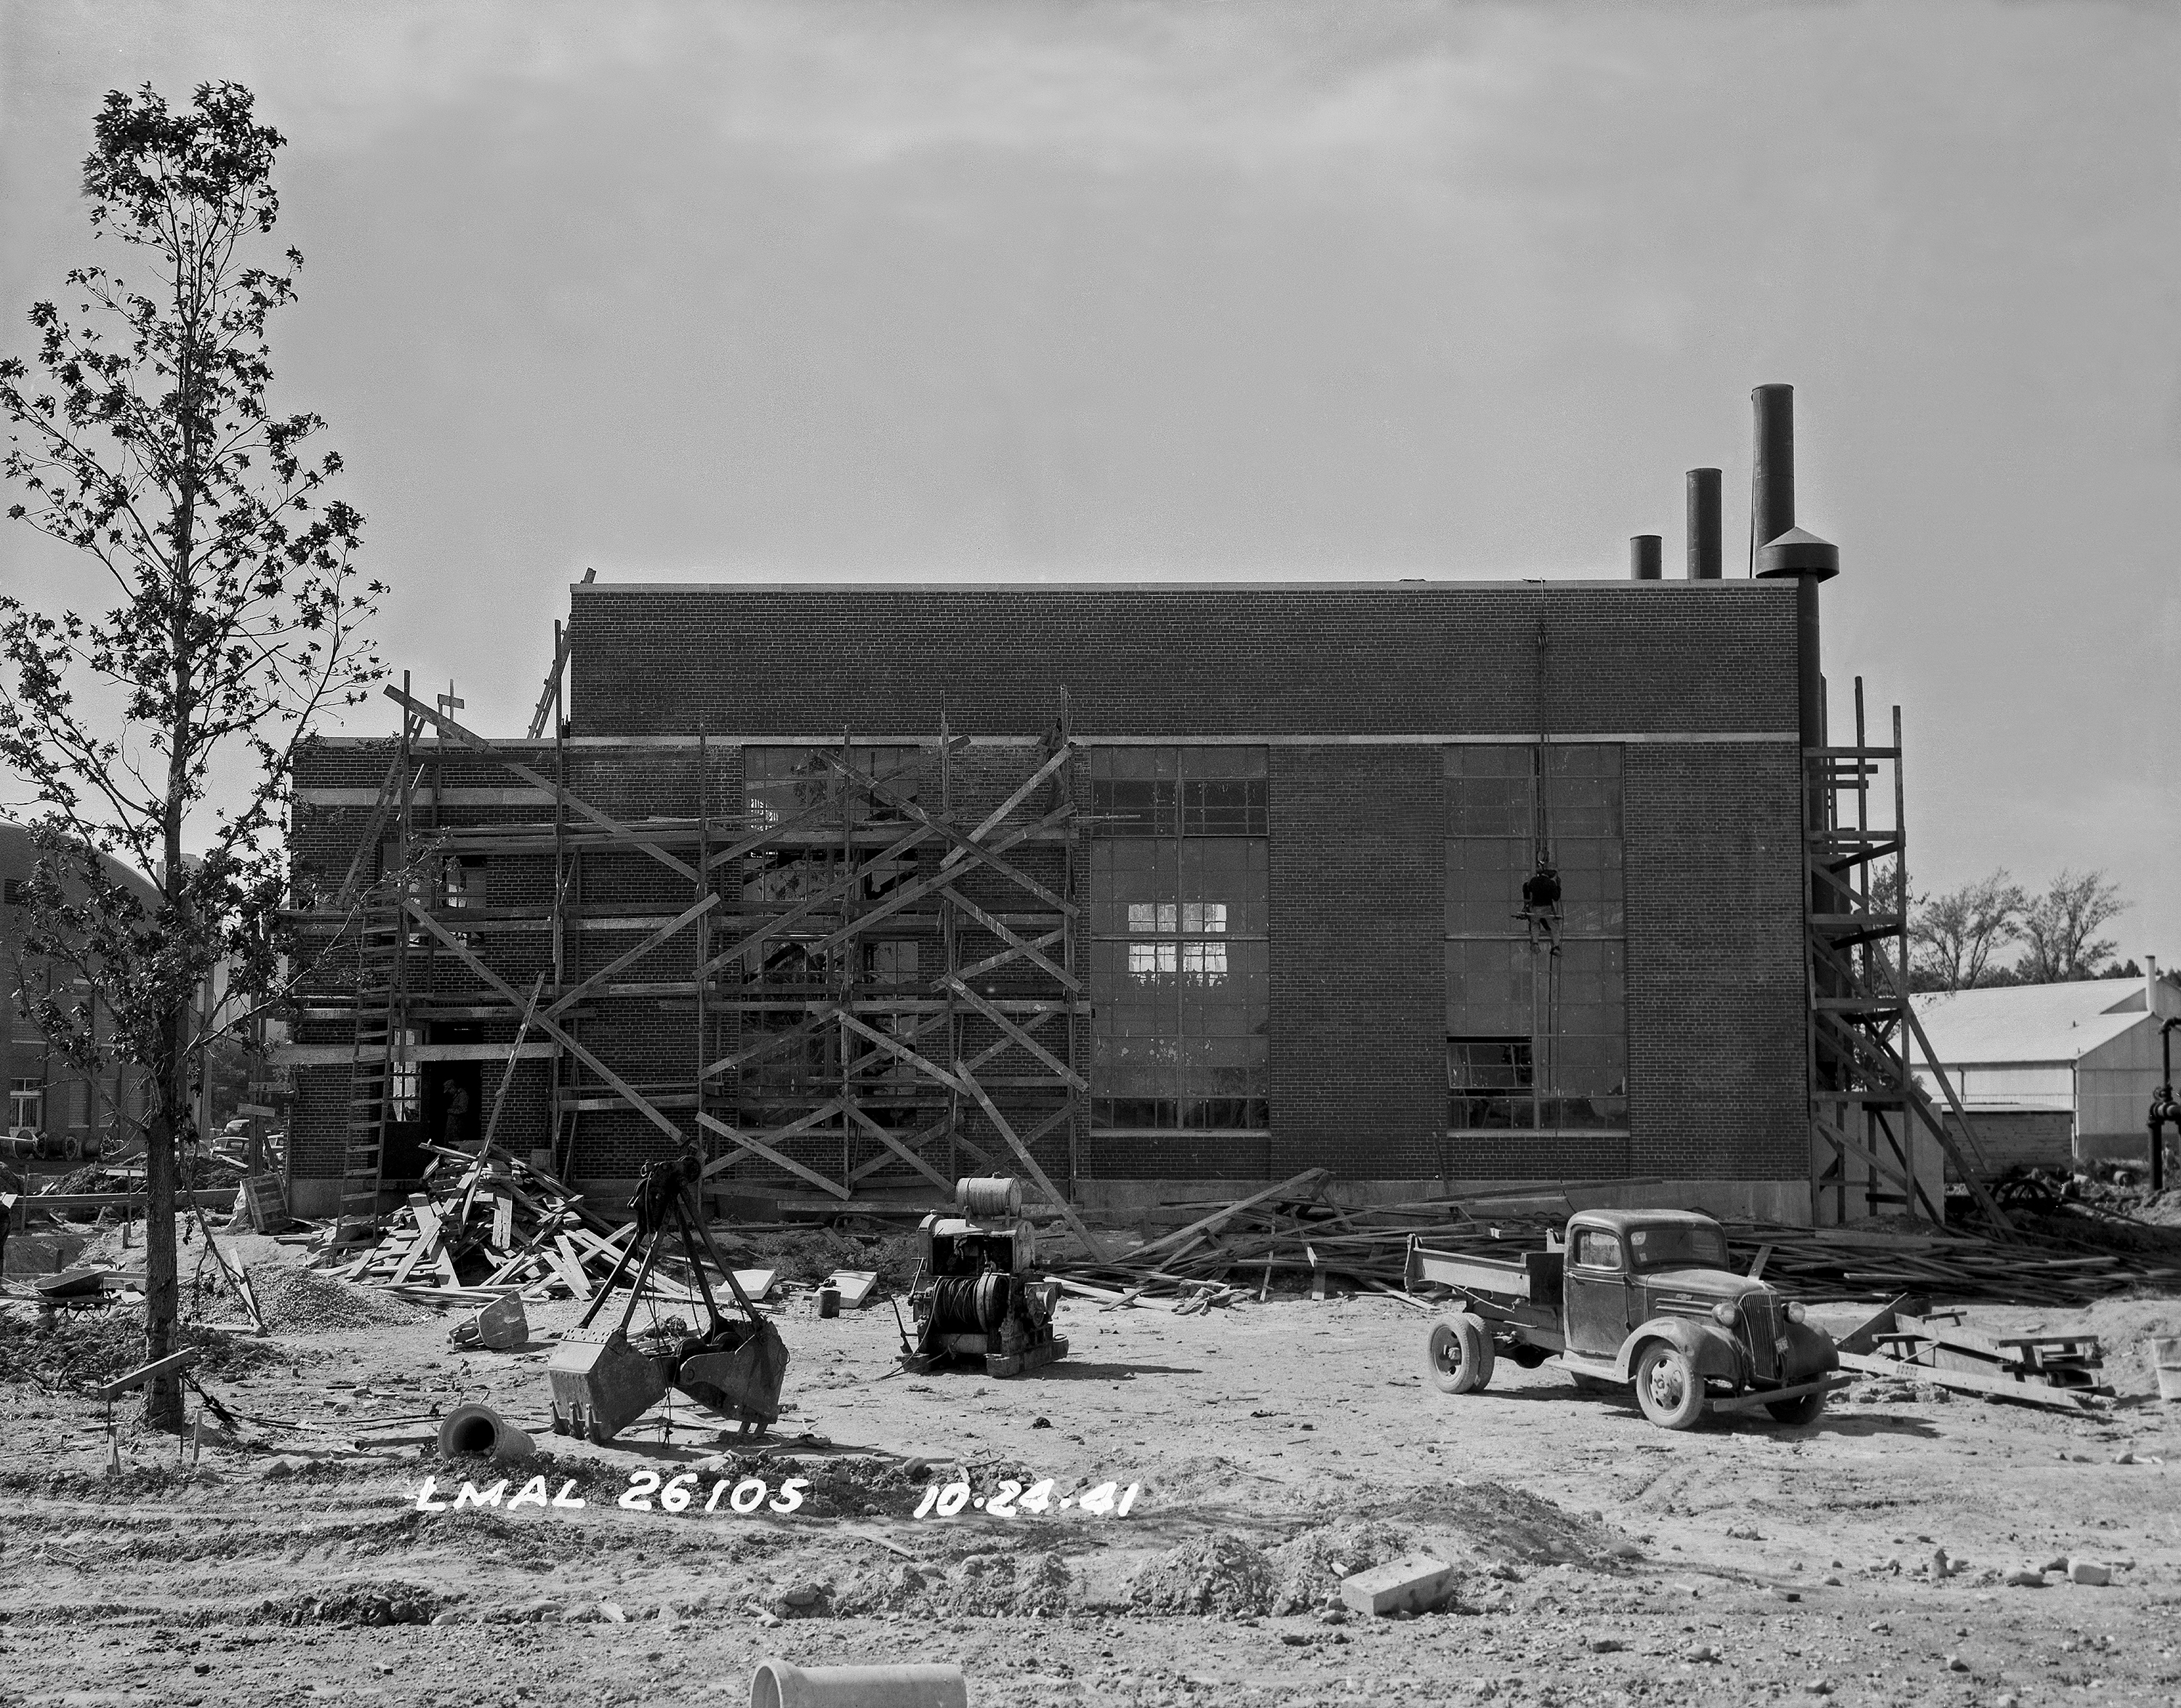 Part of the collection of photos showing construction progress of the electric generating plant, Building 1152, on Nov. 15, 1941. 